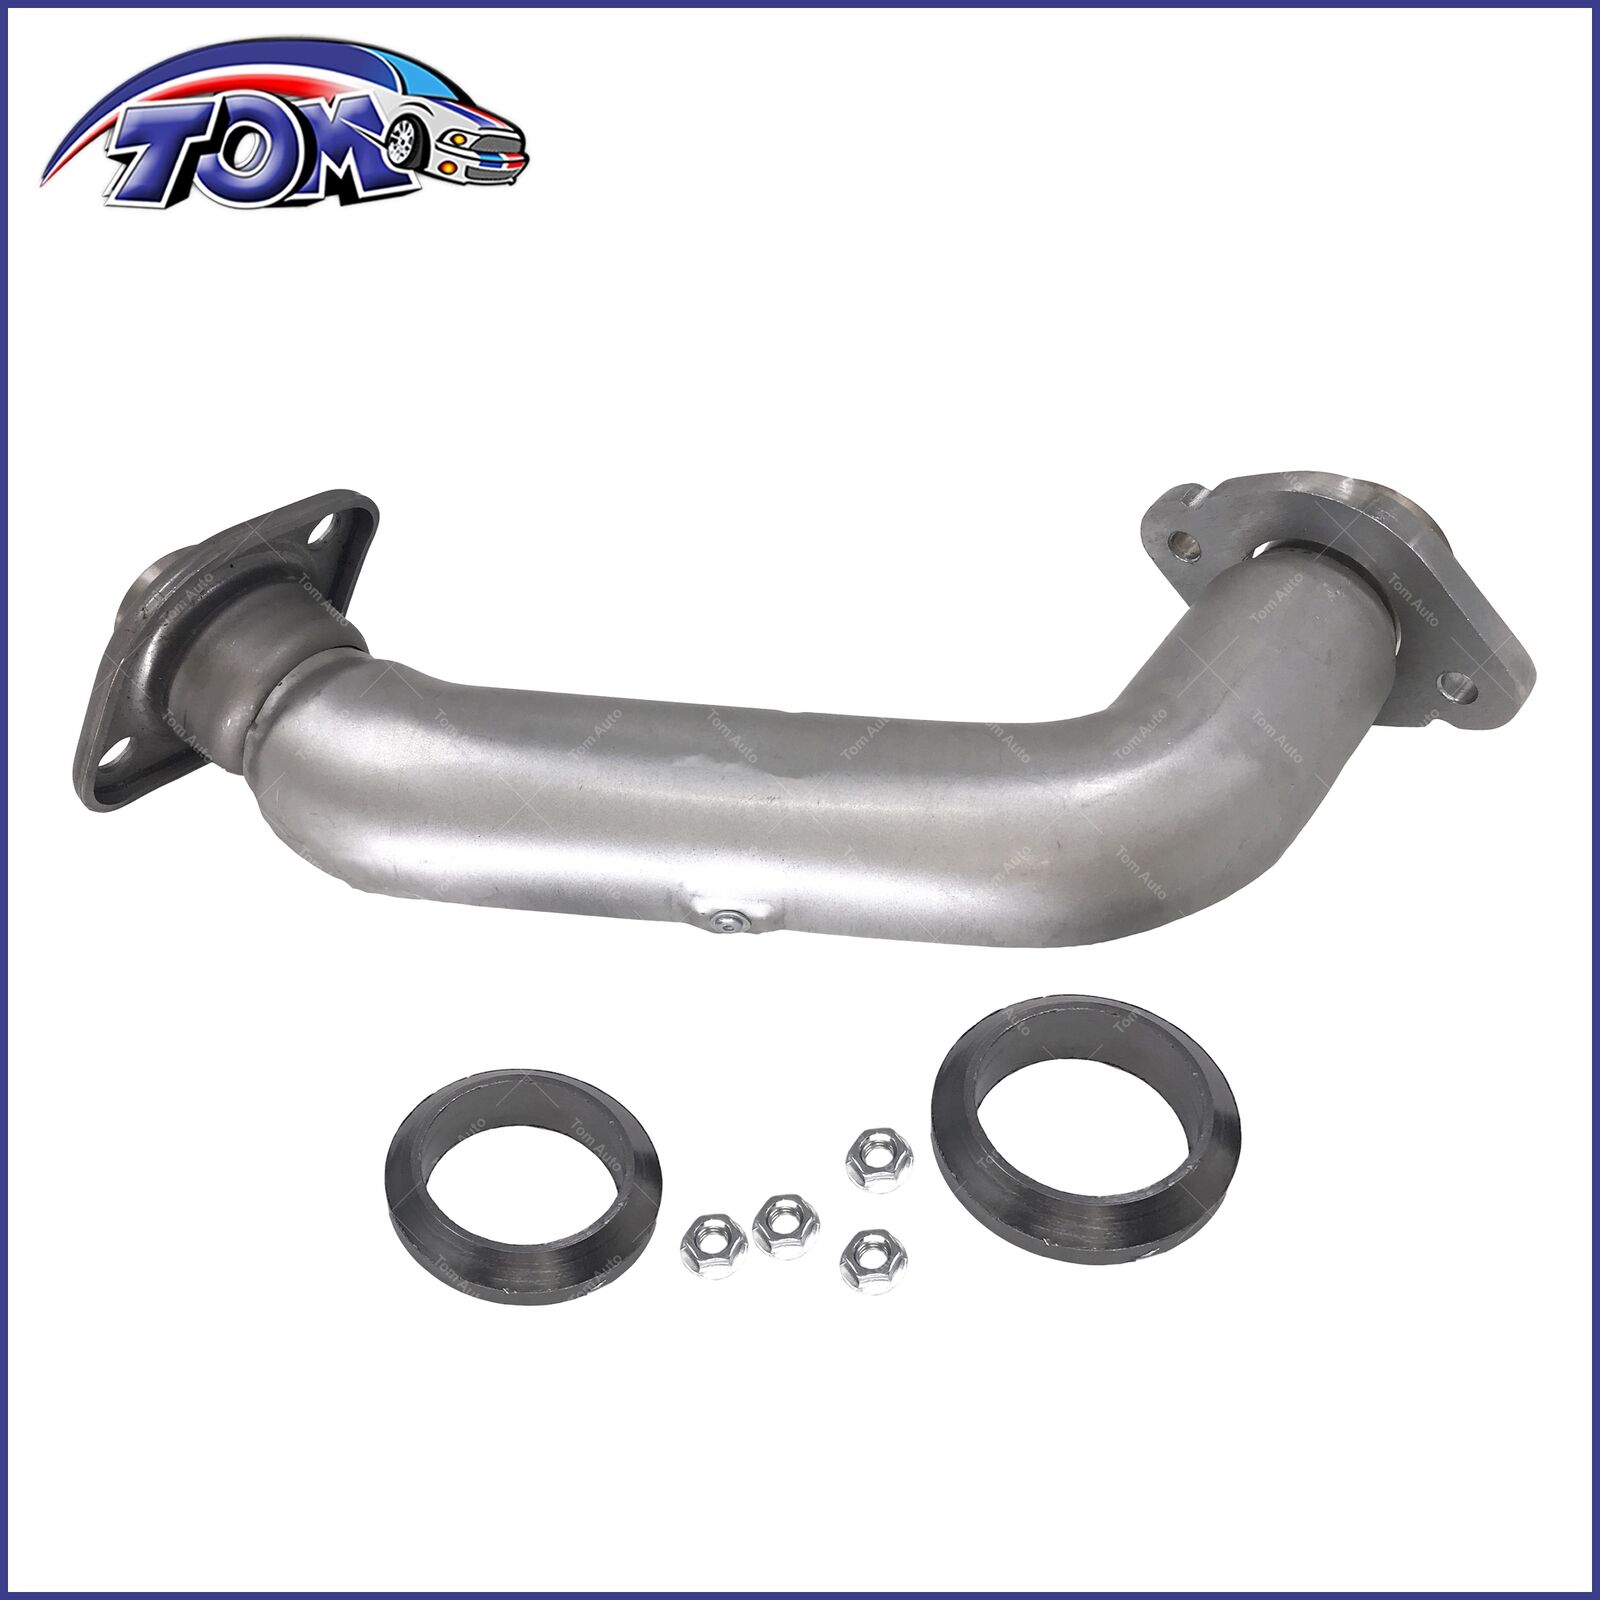 Exhaust Manifold Crossover Pipe For Buick LaCrosse Lucerne Grand Prix Chevrolet